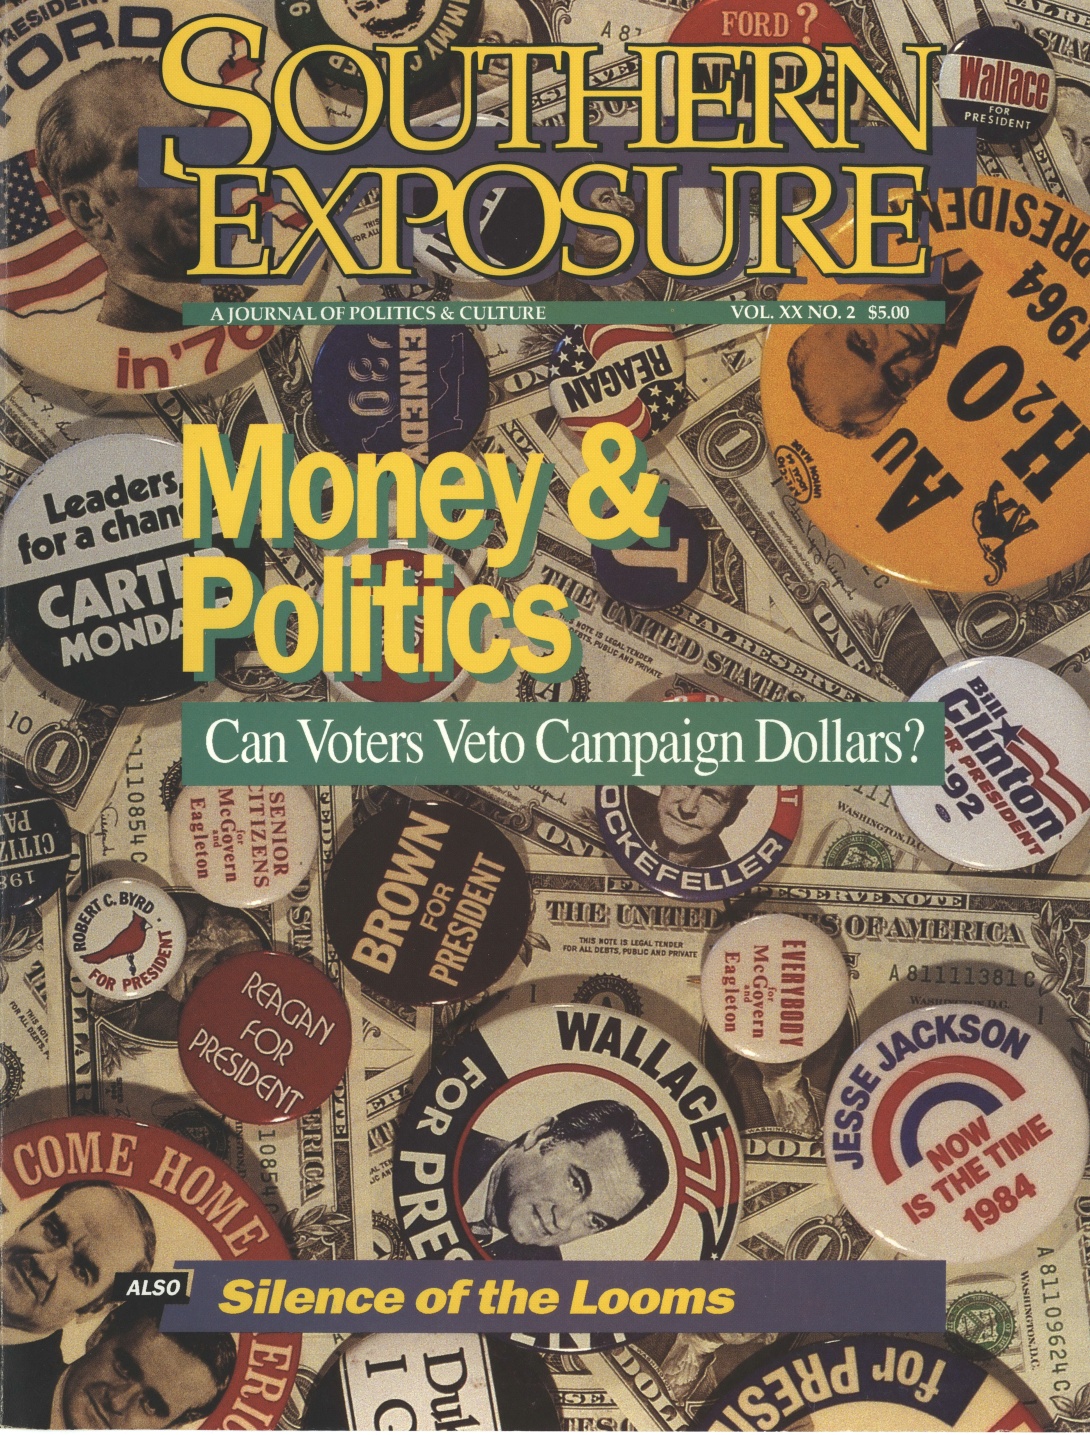 Magazine cover with photo of campaign buttons and dollar bills, reading "Money & Politics"